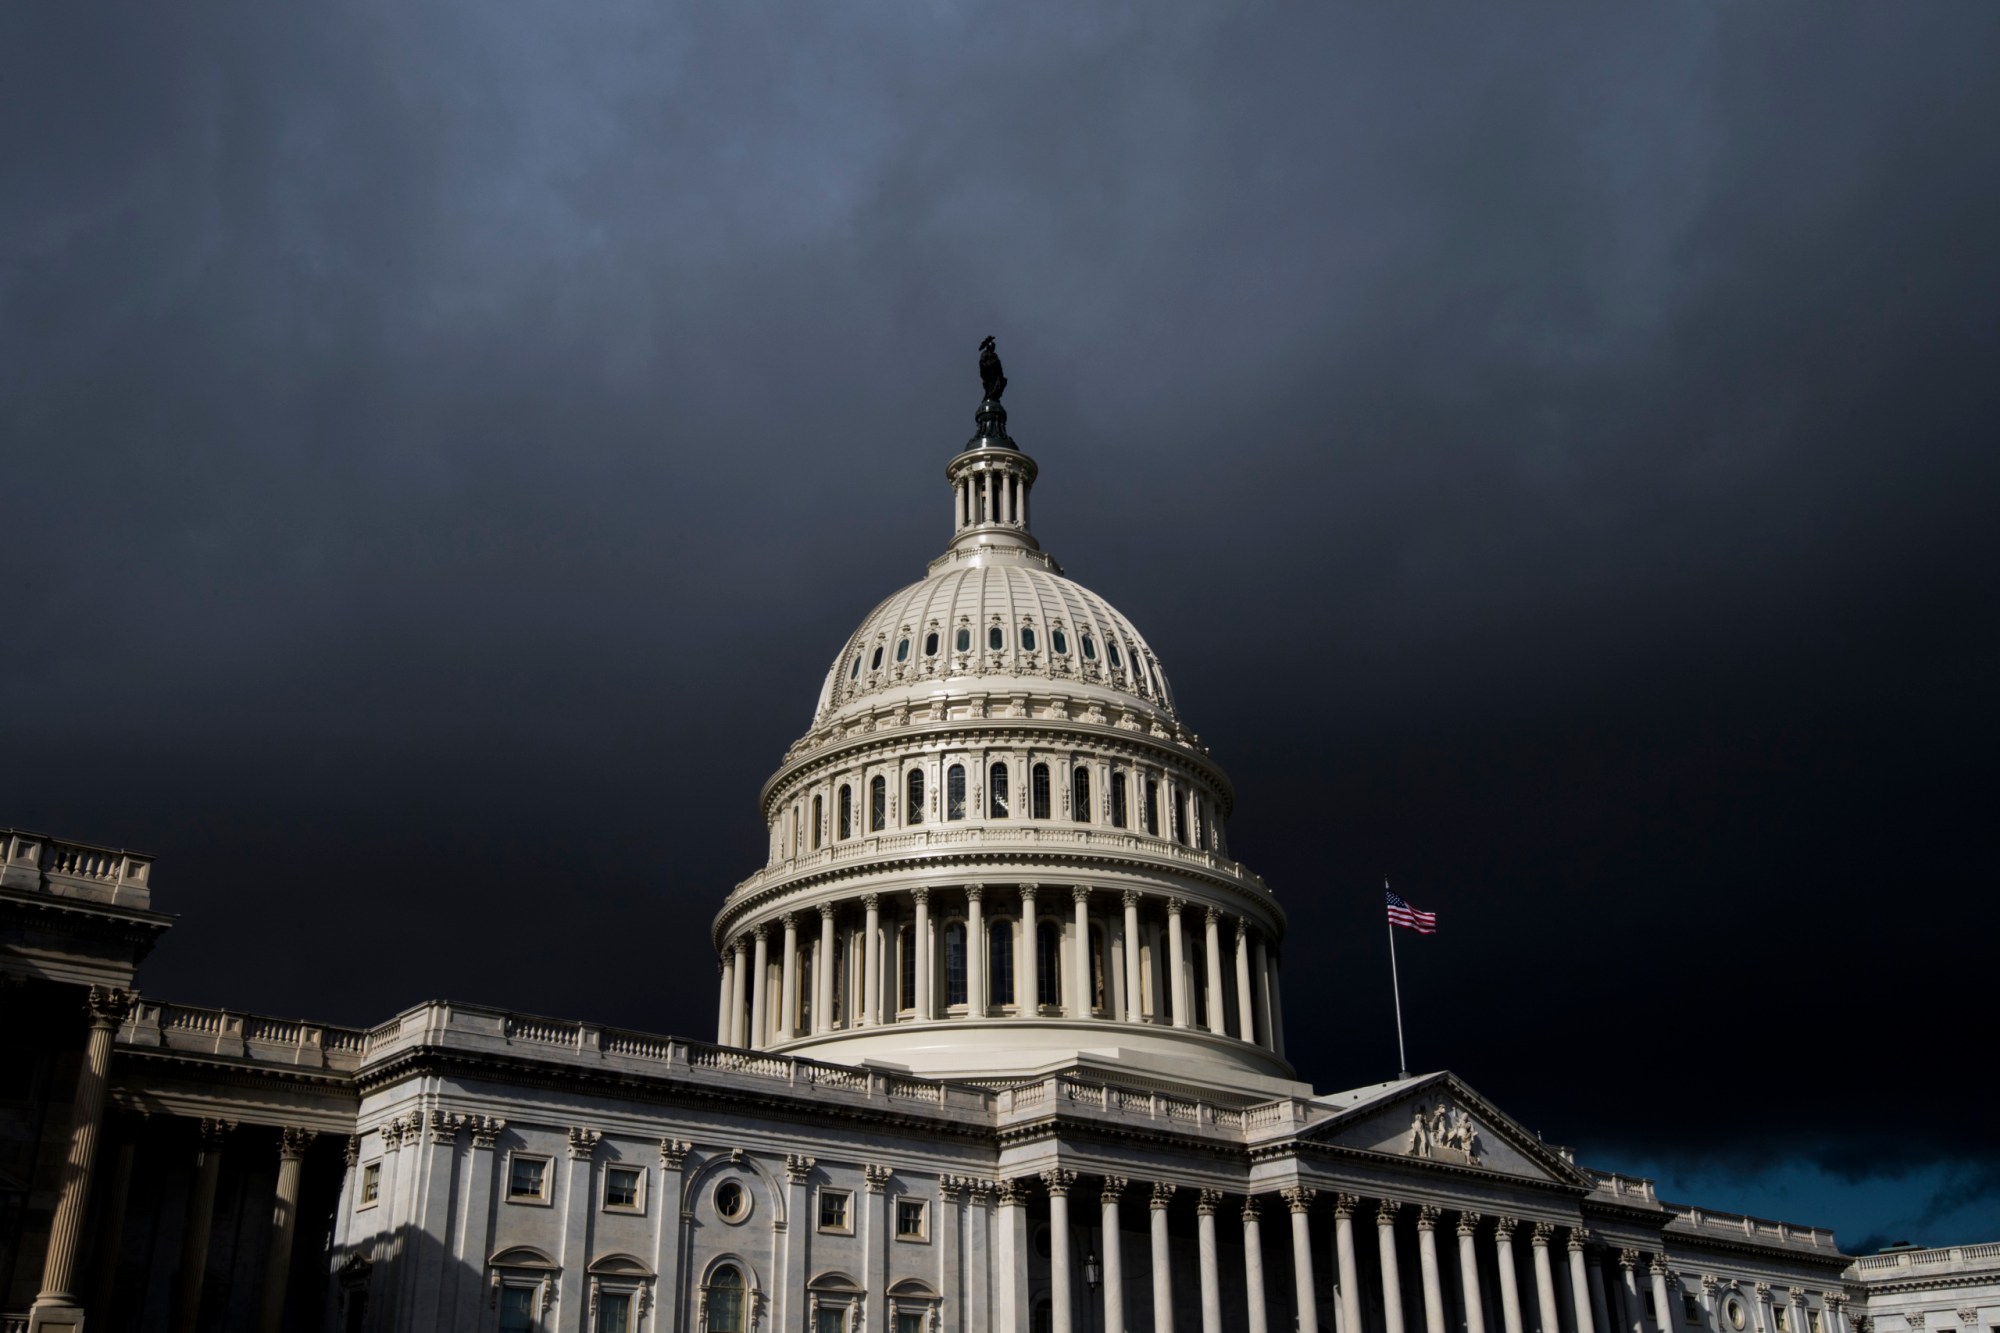 Storm clouds pass over the dome of the U.S. Capitol building, January 2018. (Getty/Bill Clark)